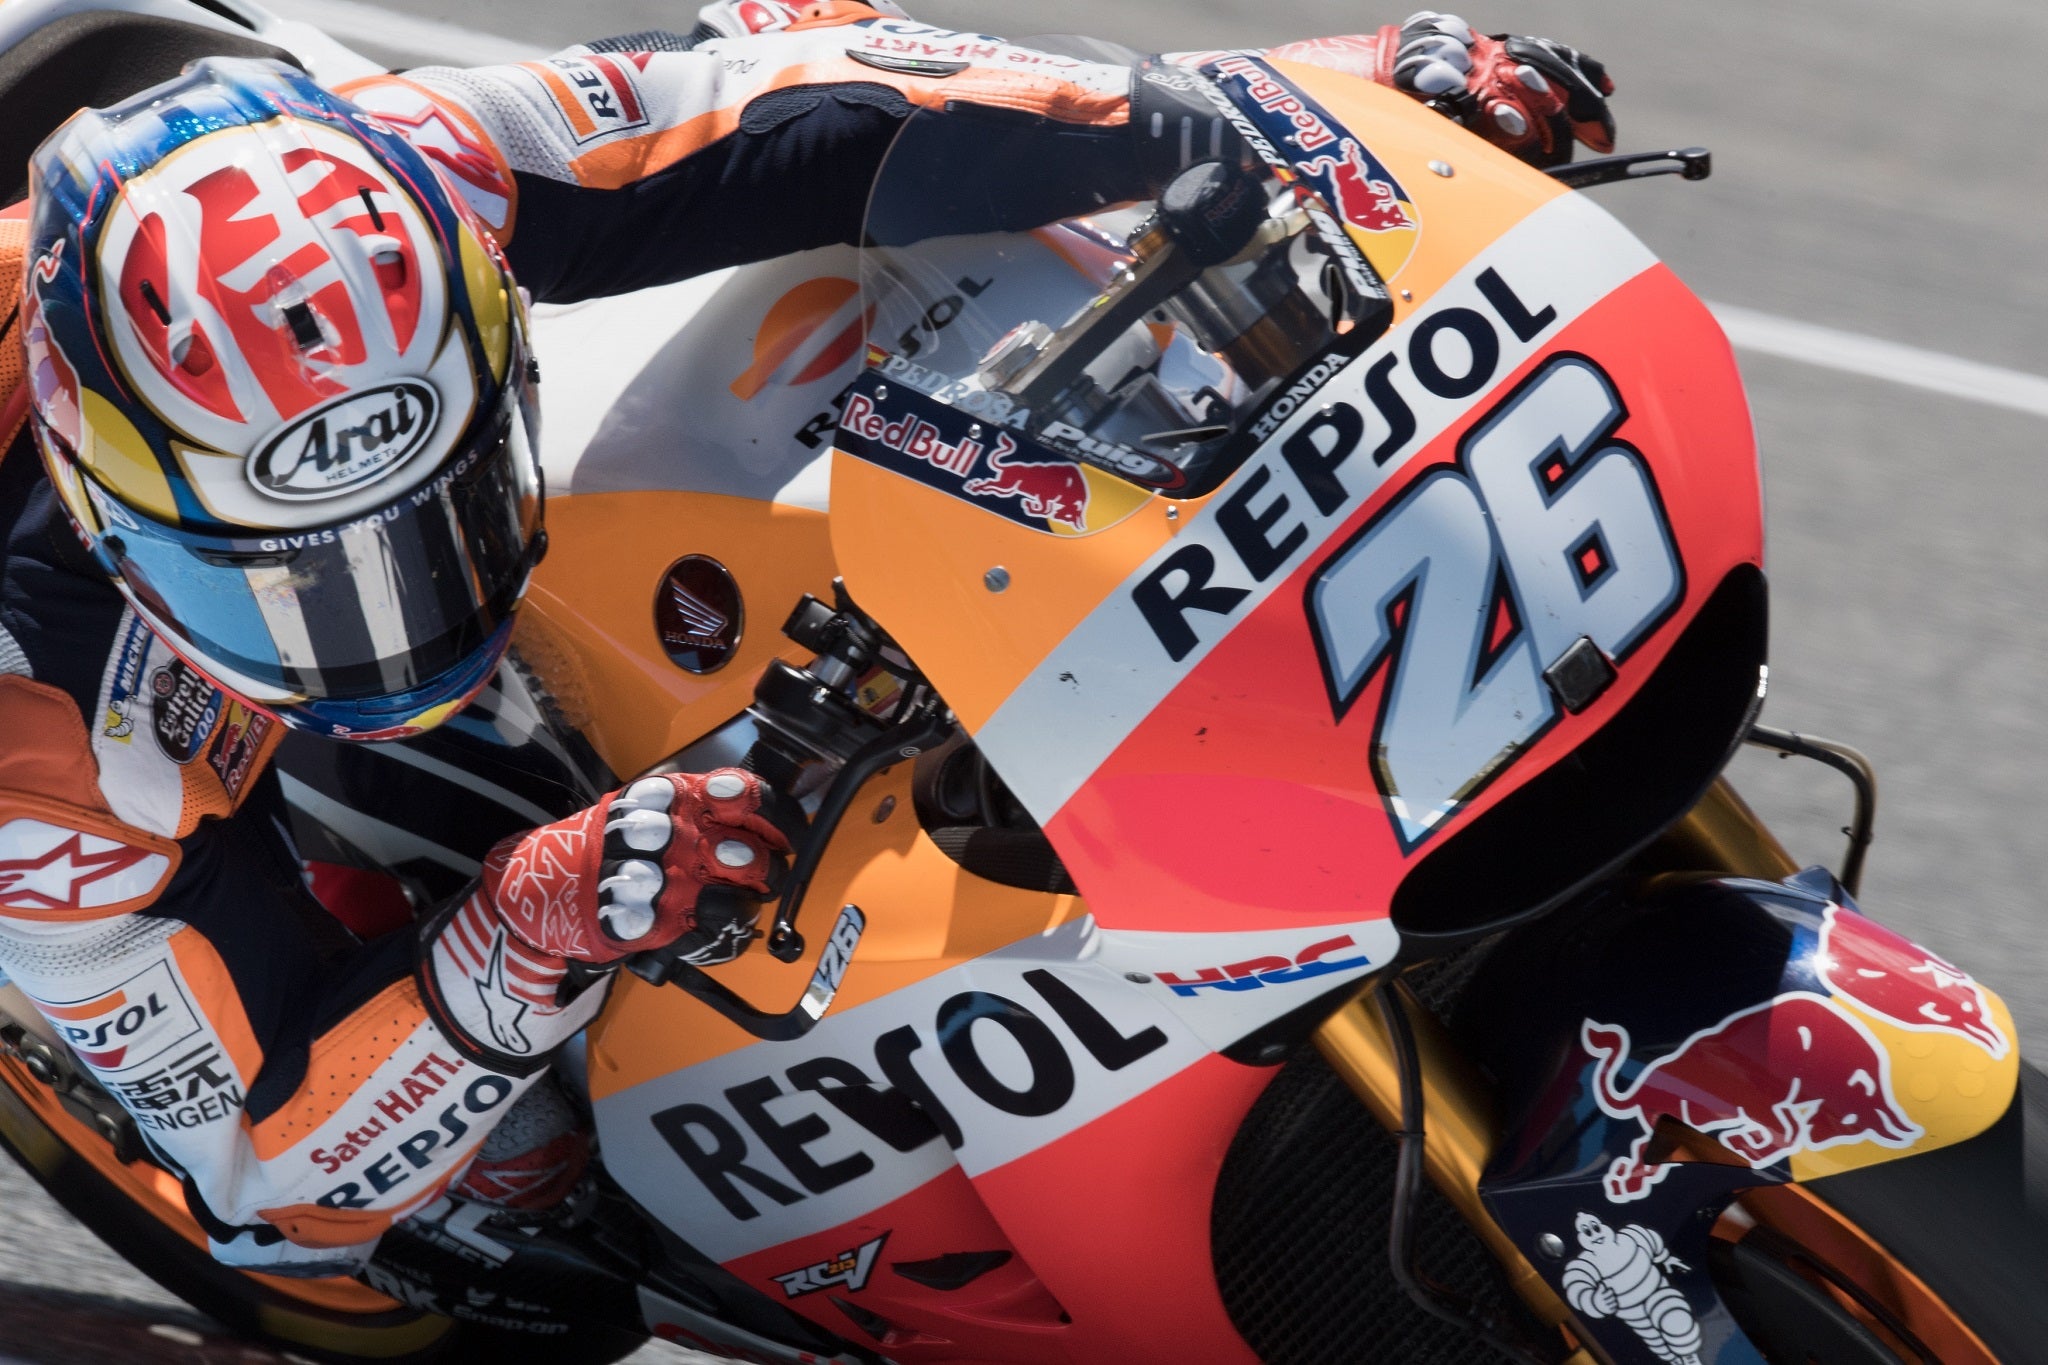 Pedrosa managed the gap to Marquez superbly to control the entire race